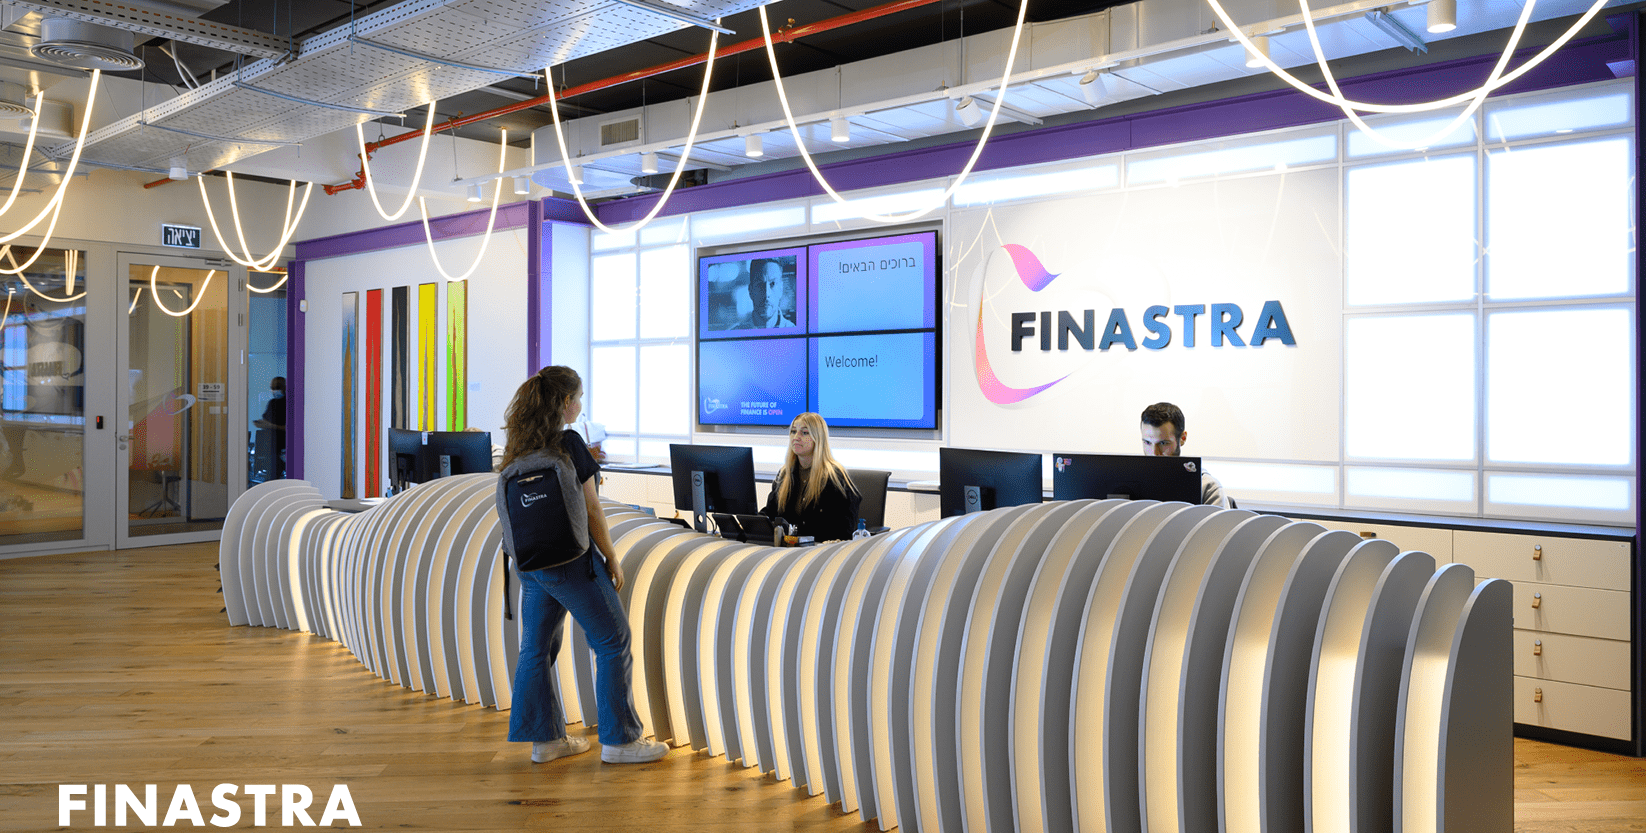 Welcome to Finastra!